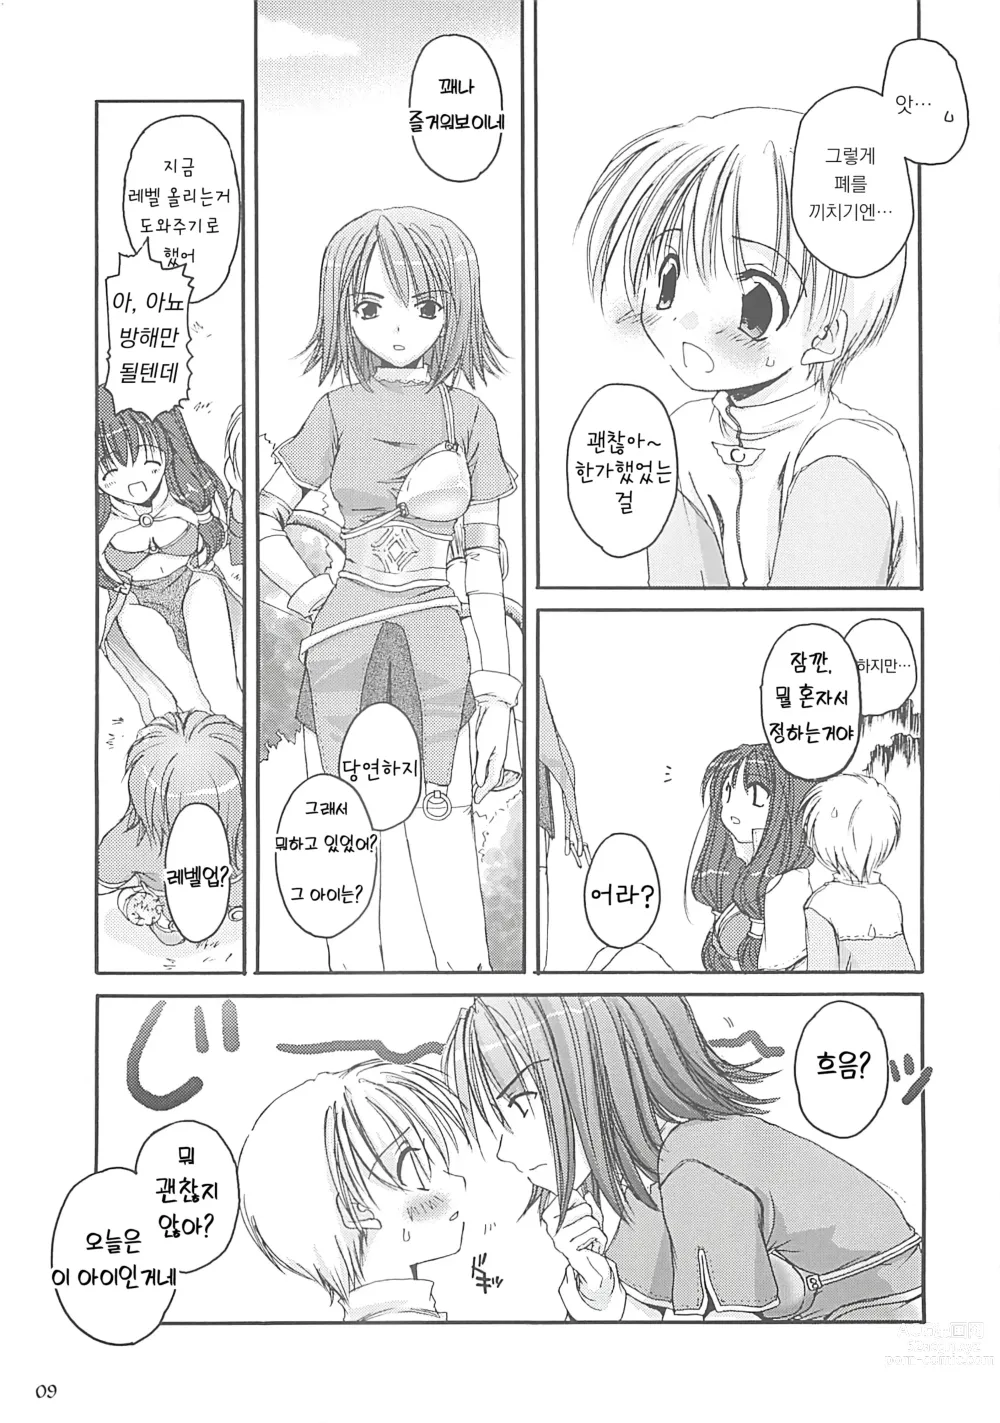 Page 8 of doujinshi D.L. Action 13